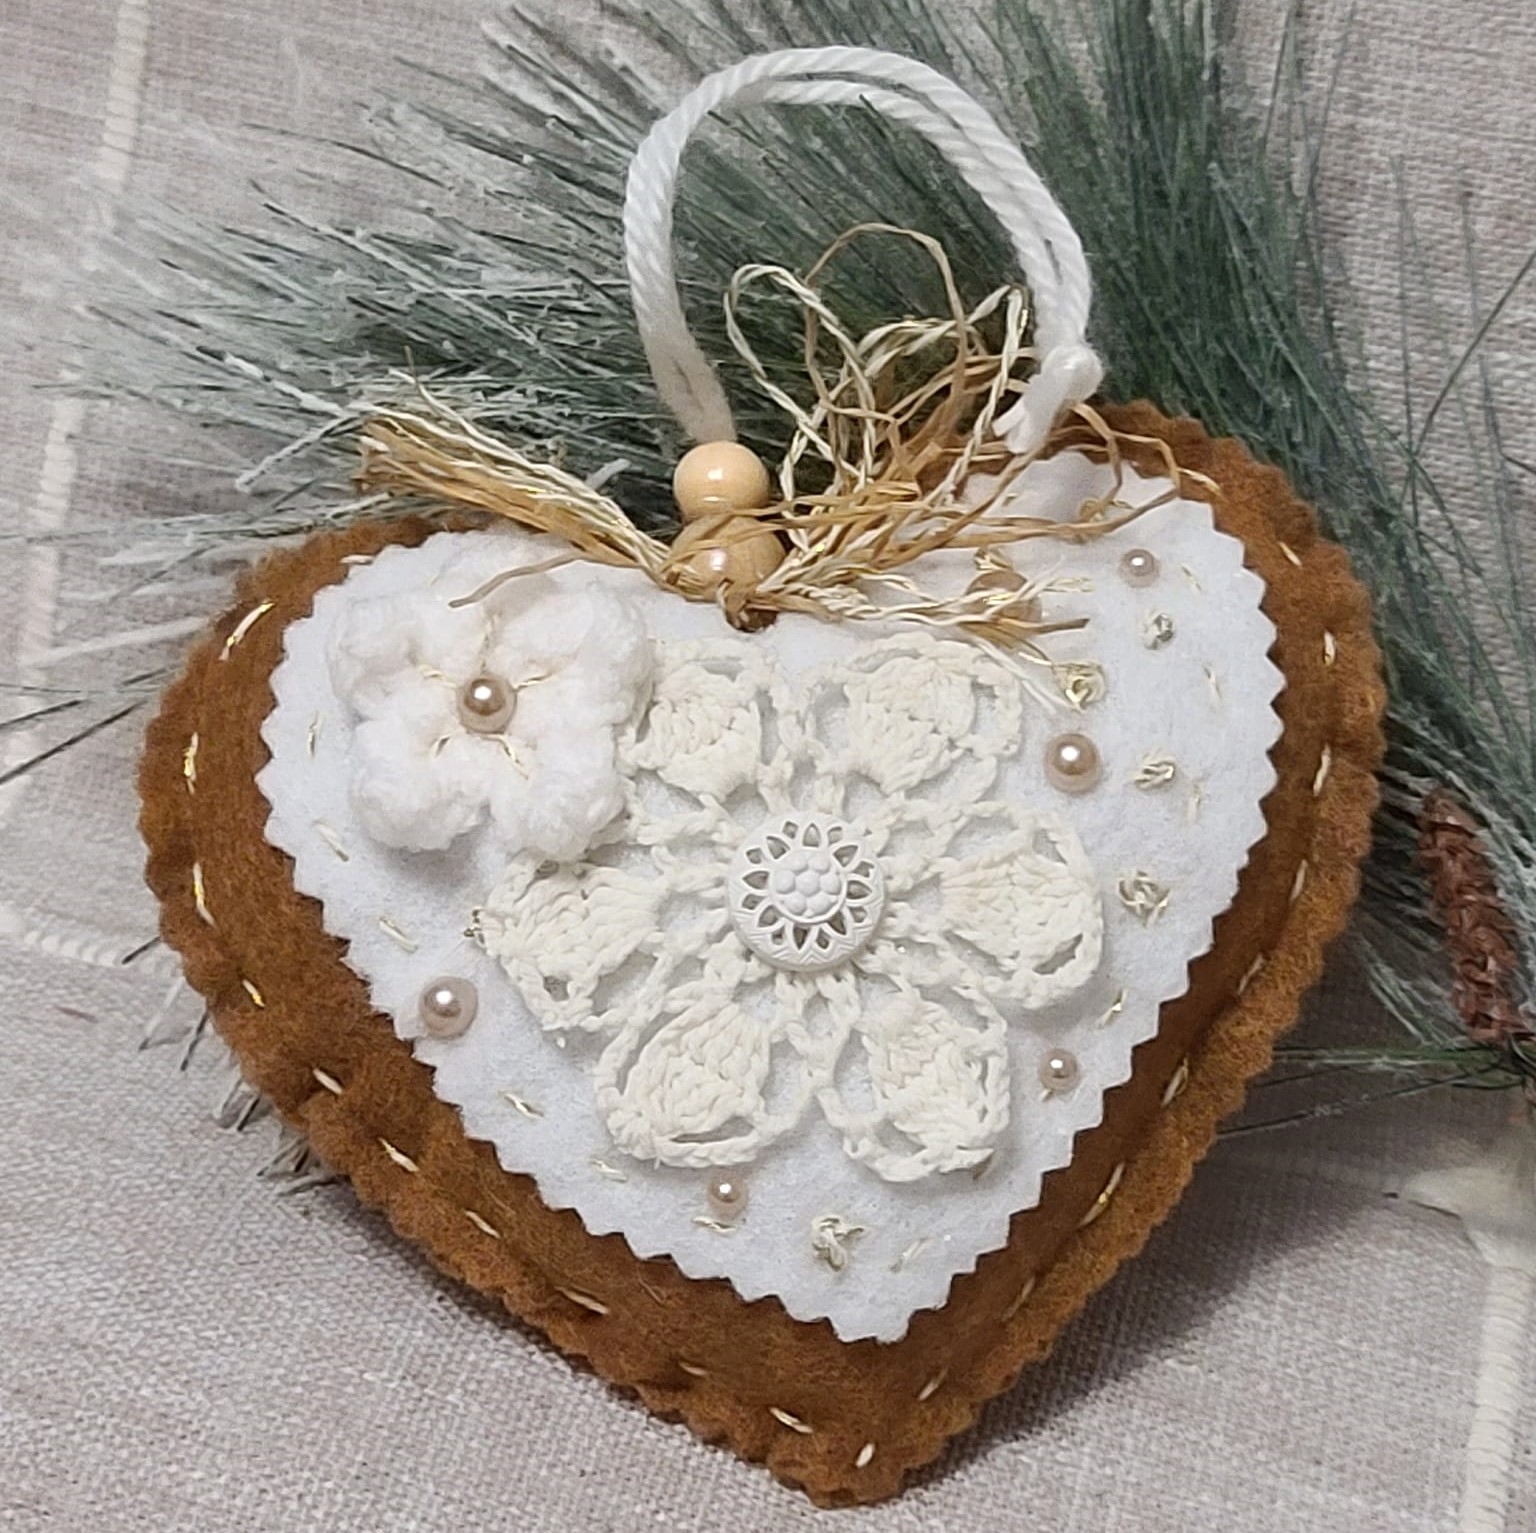 Felt gingerbread white icing center lace heart ornament